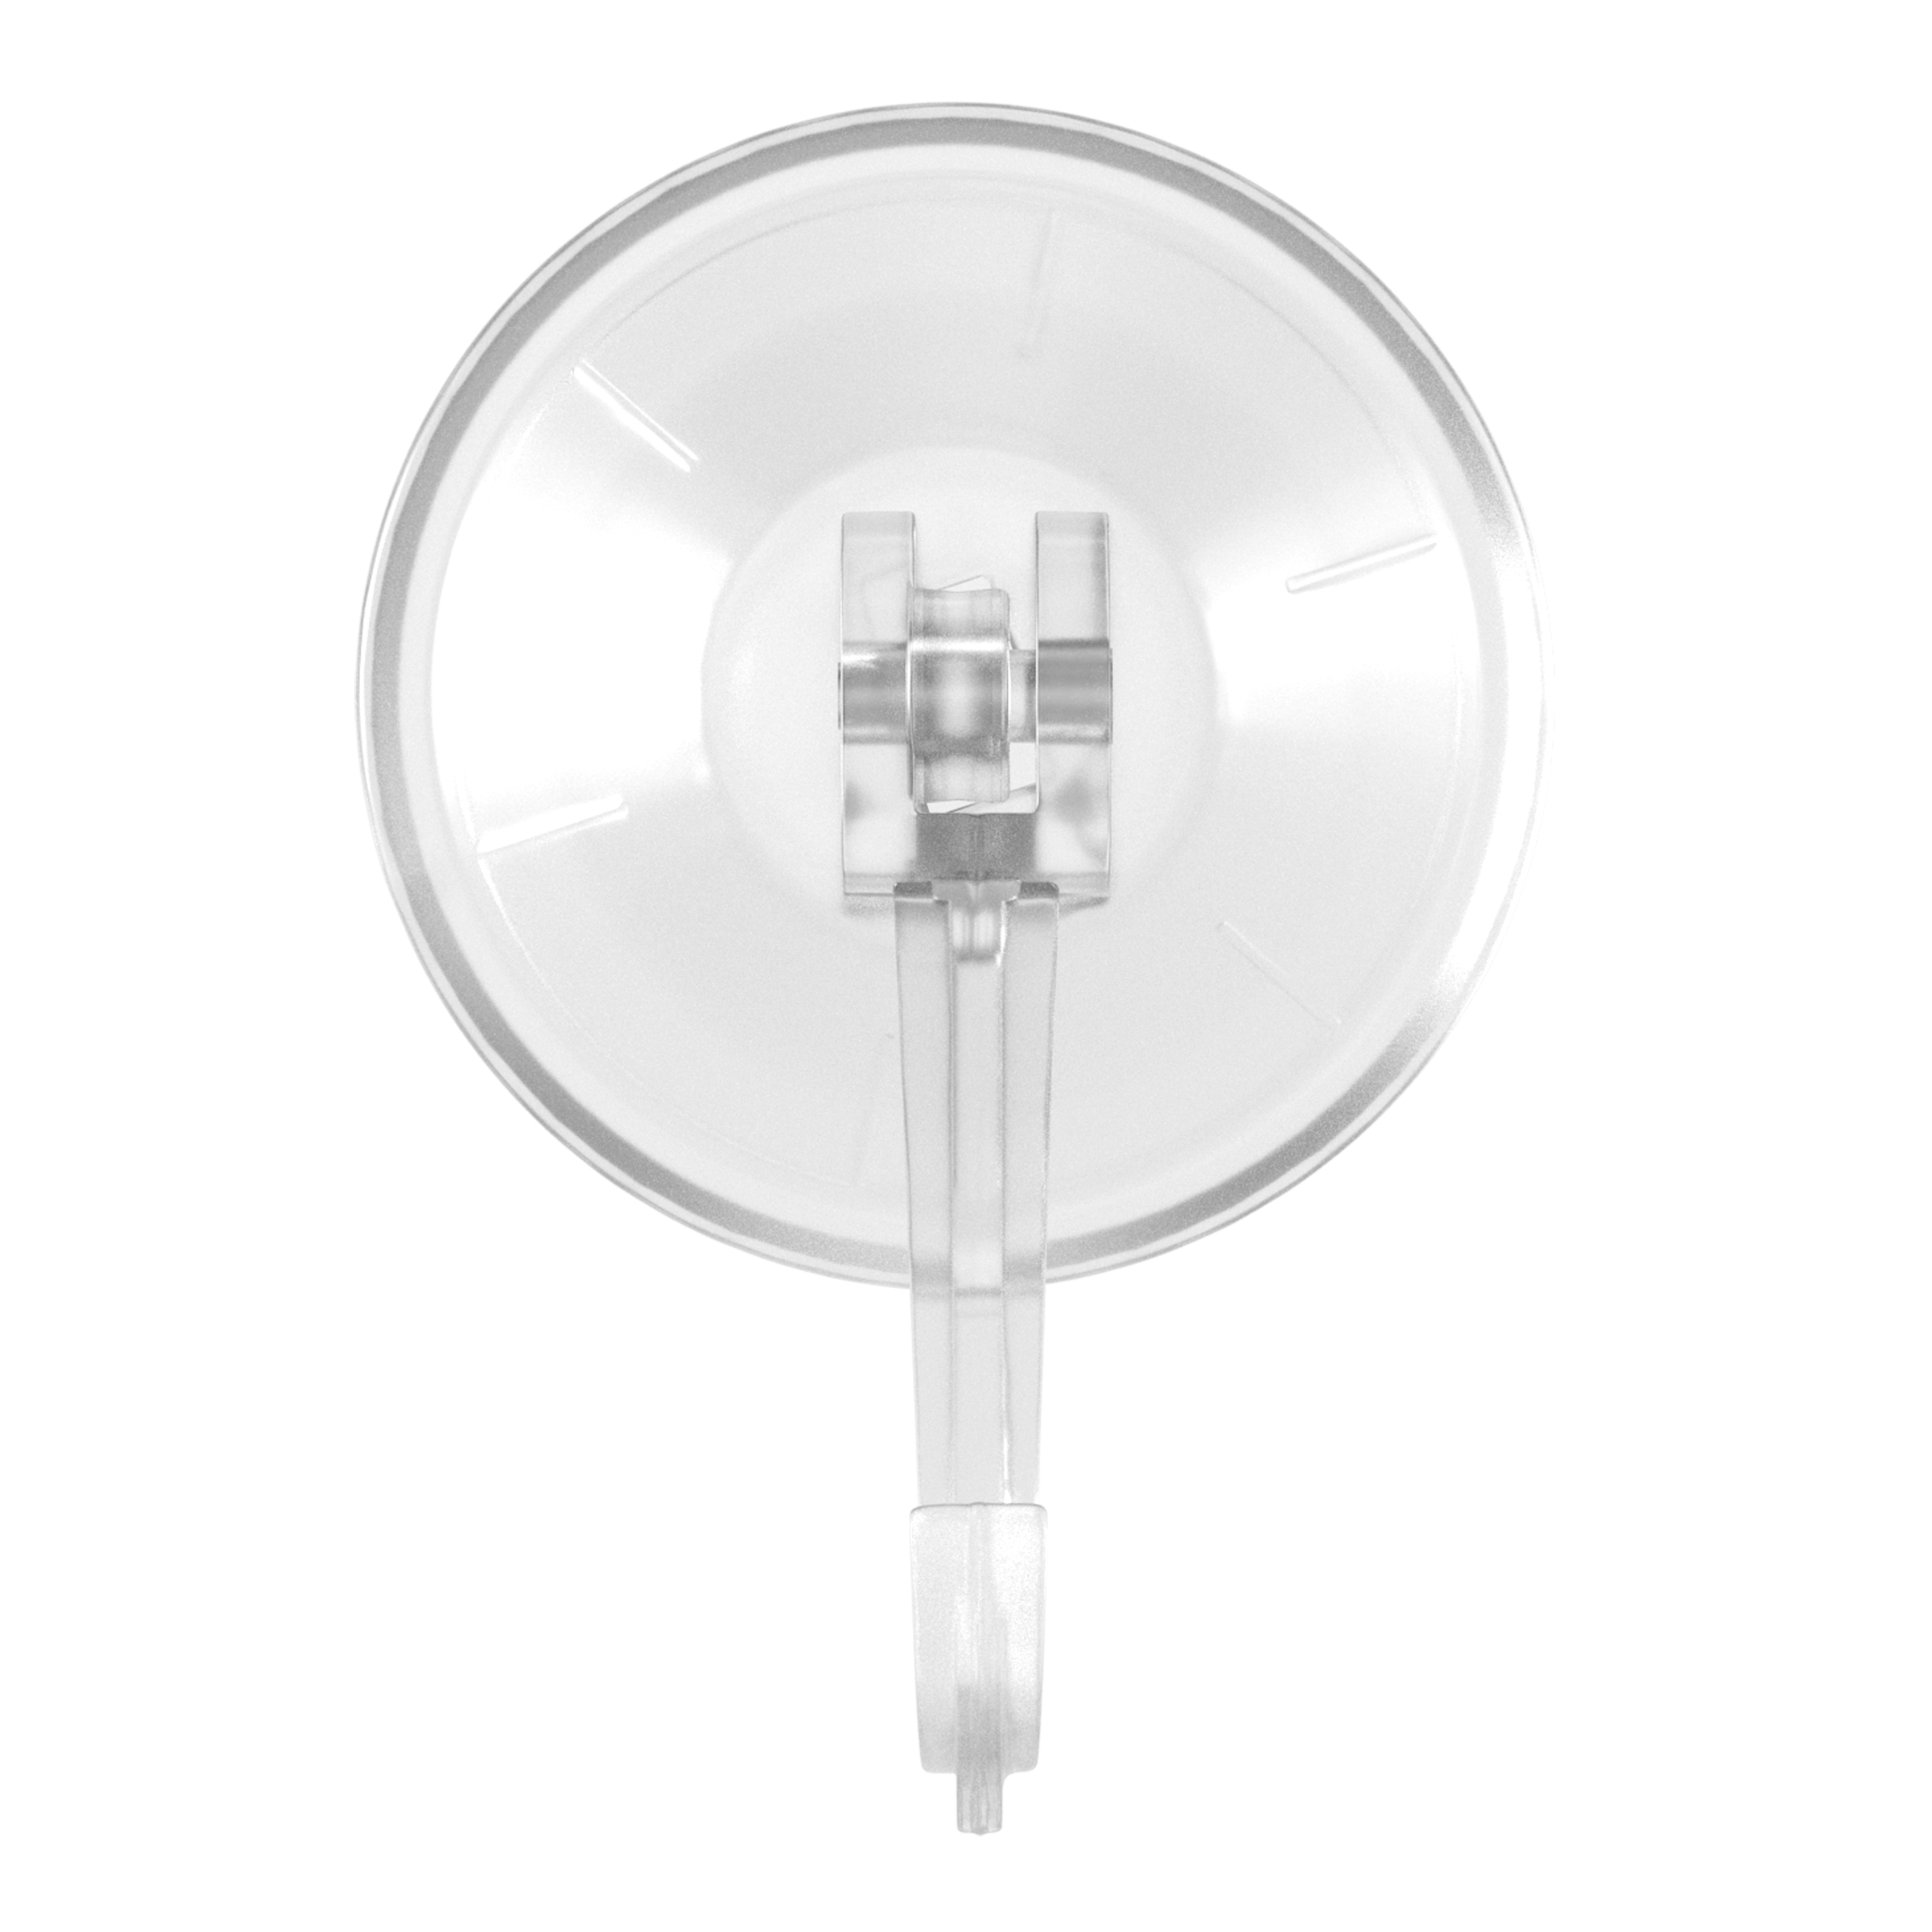 OOK Pressure Mount Suction Cups, Clear, 5lbs, Plastic, Pack of 2 - image 2 of 6